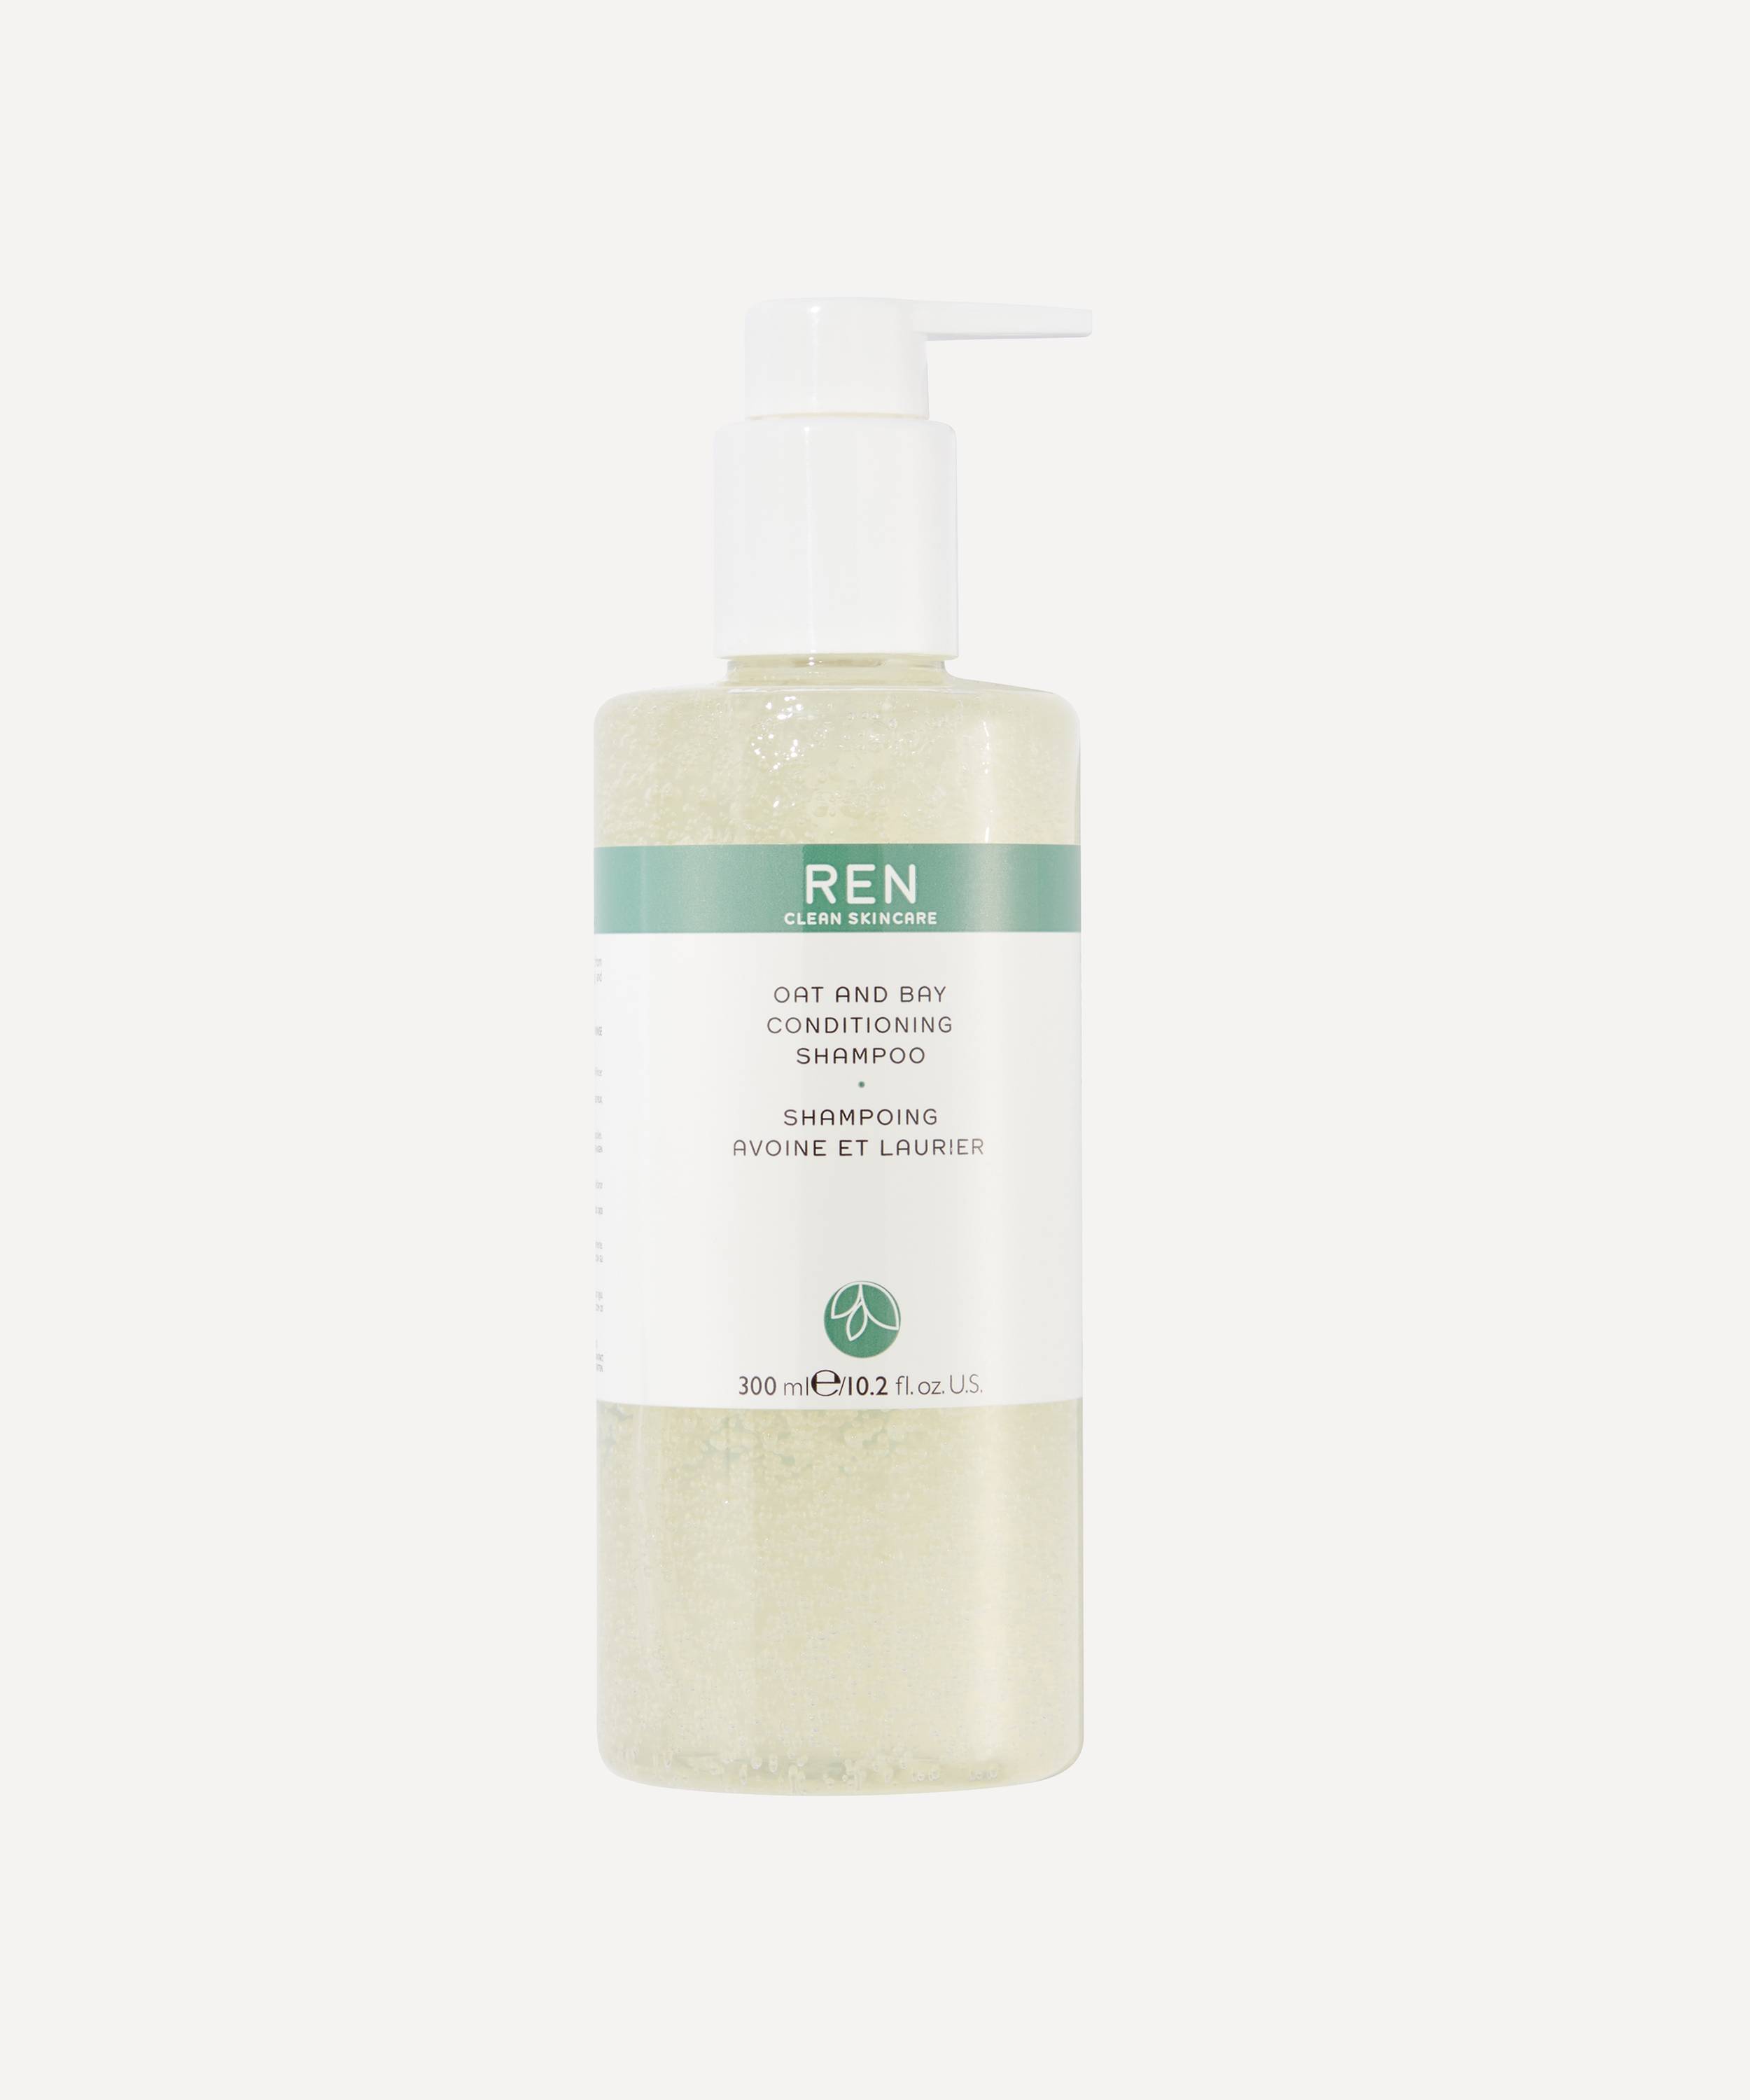 paritet Insister besked REN Clean Skincare Oat and Bay Conditioning Shampoo 300ml | Liberty